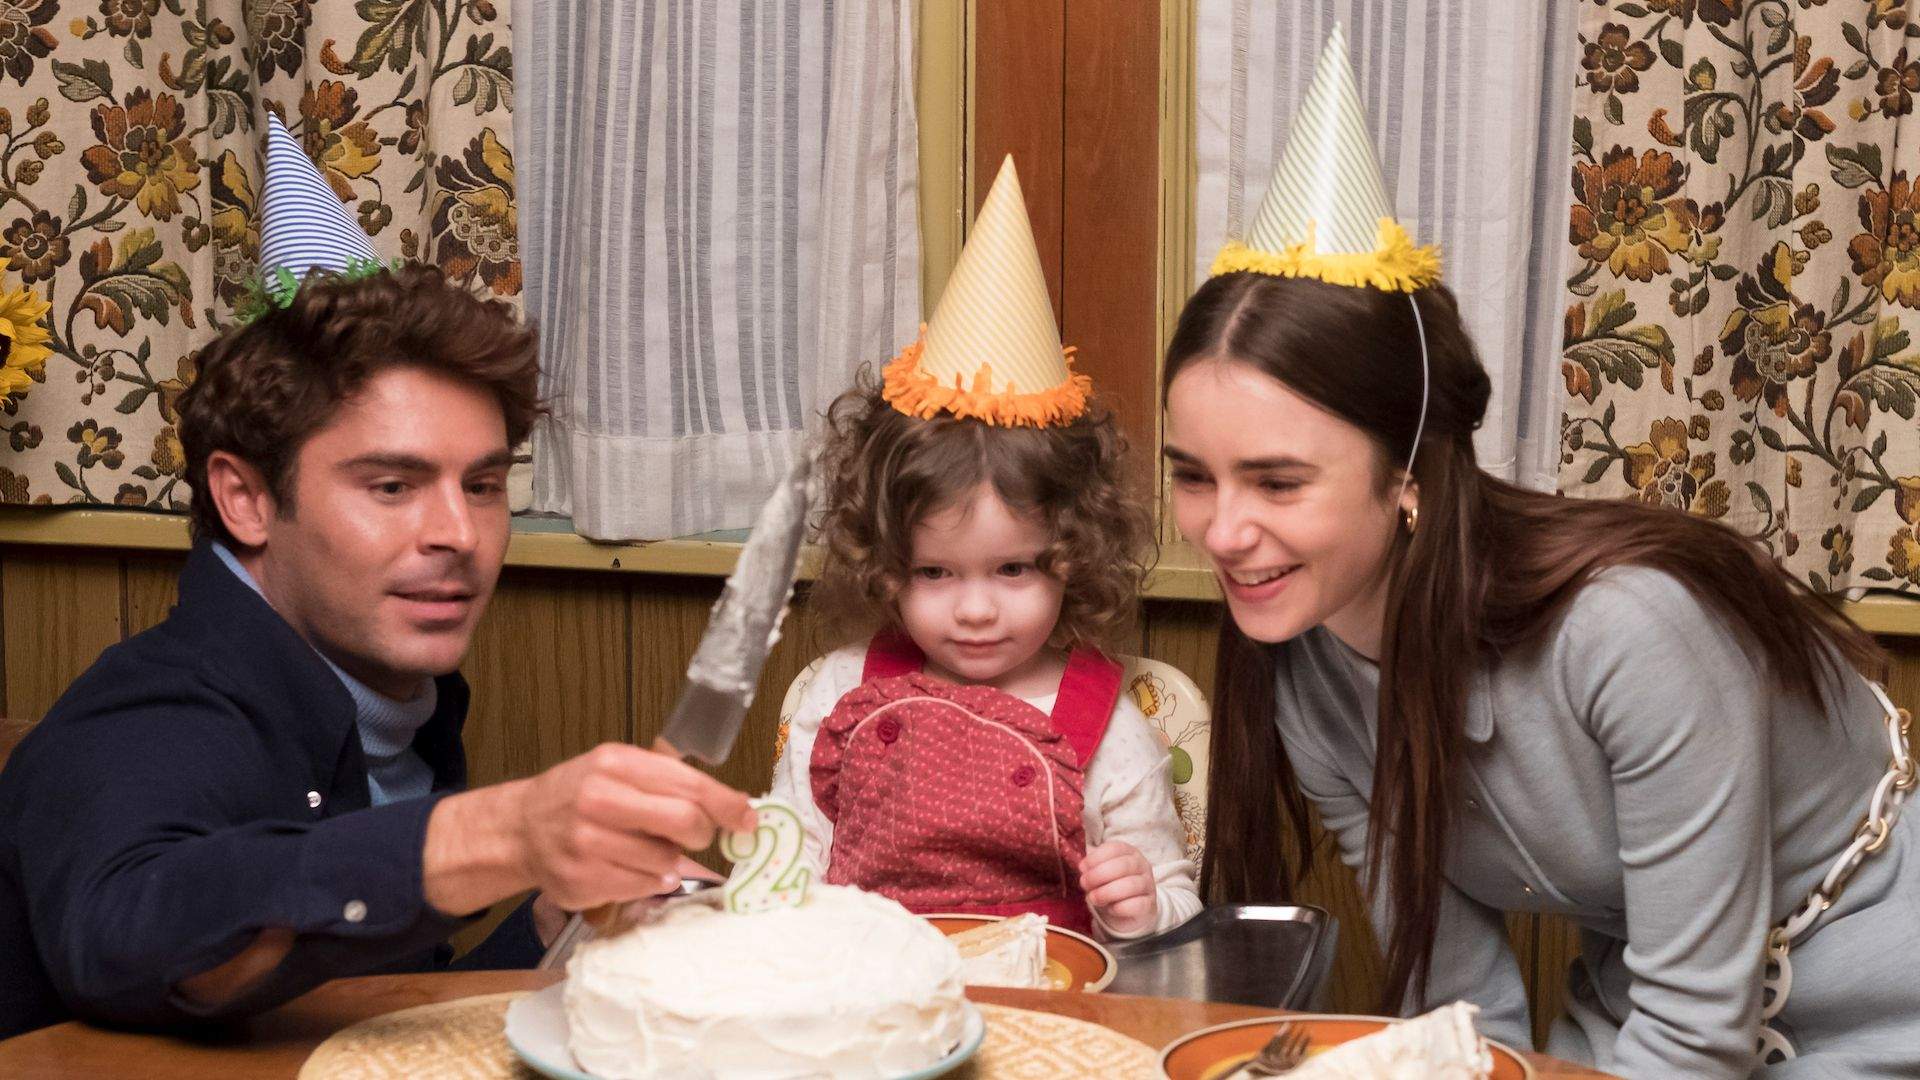 Zac Efron Transforms Into a Serial Killer in the Trailer for the New Ted Bundy Film